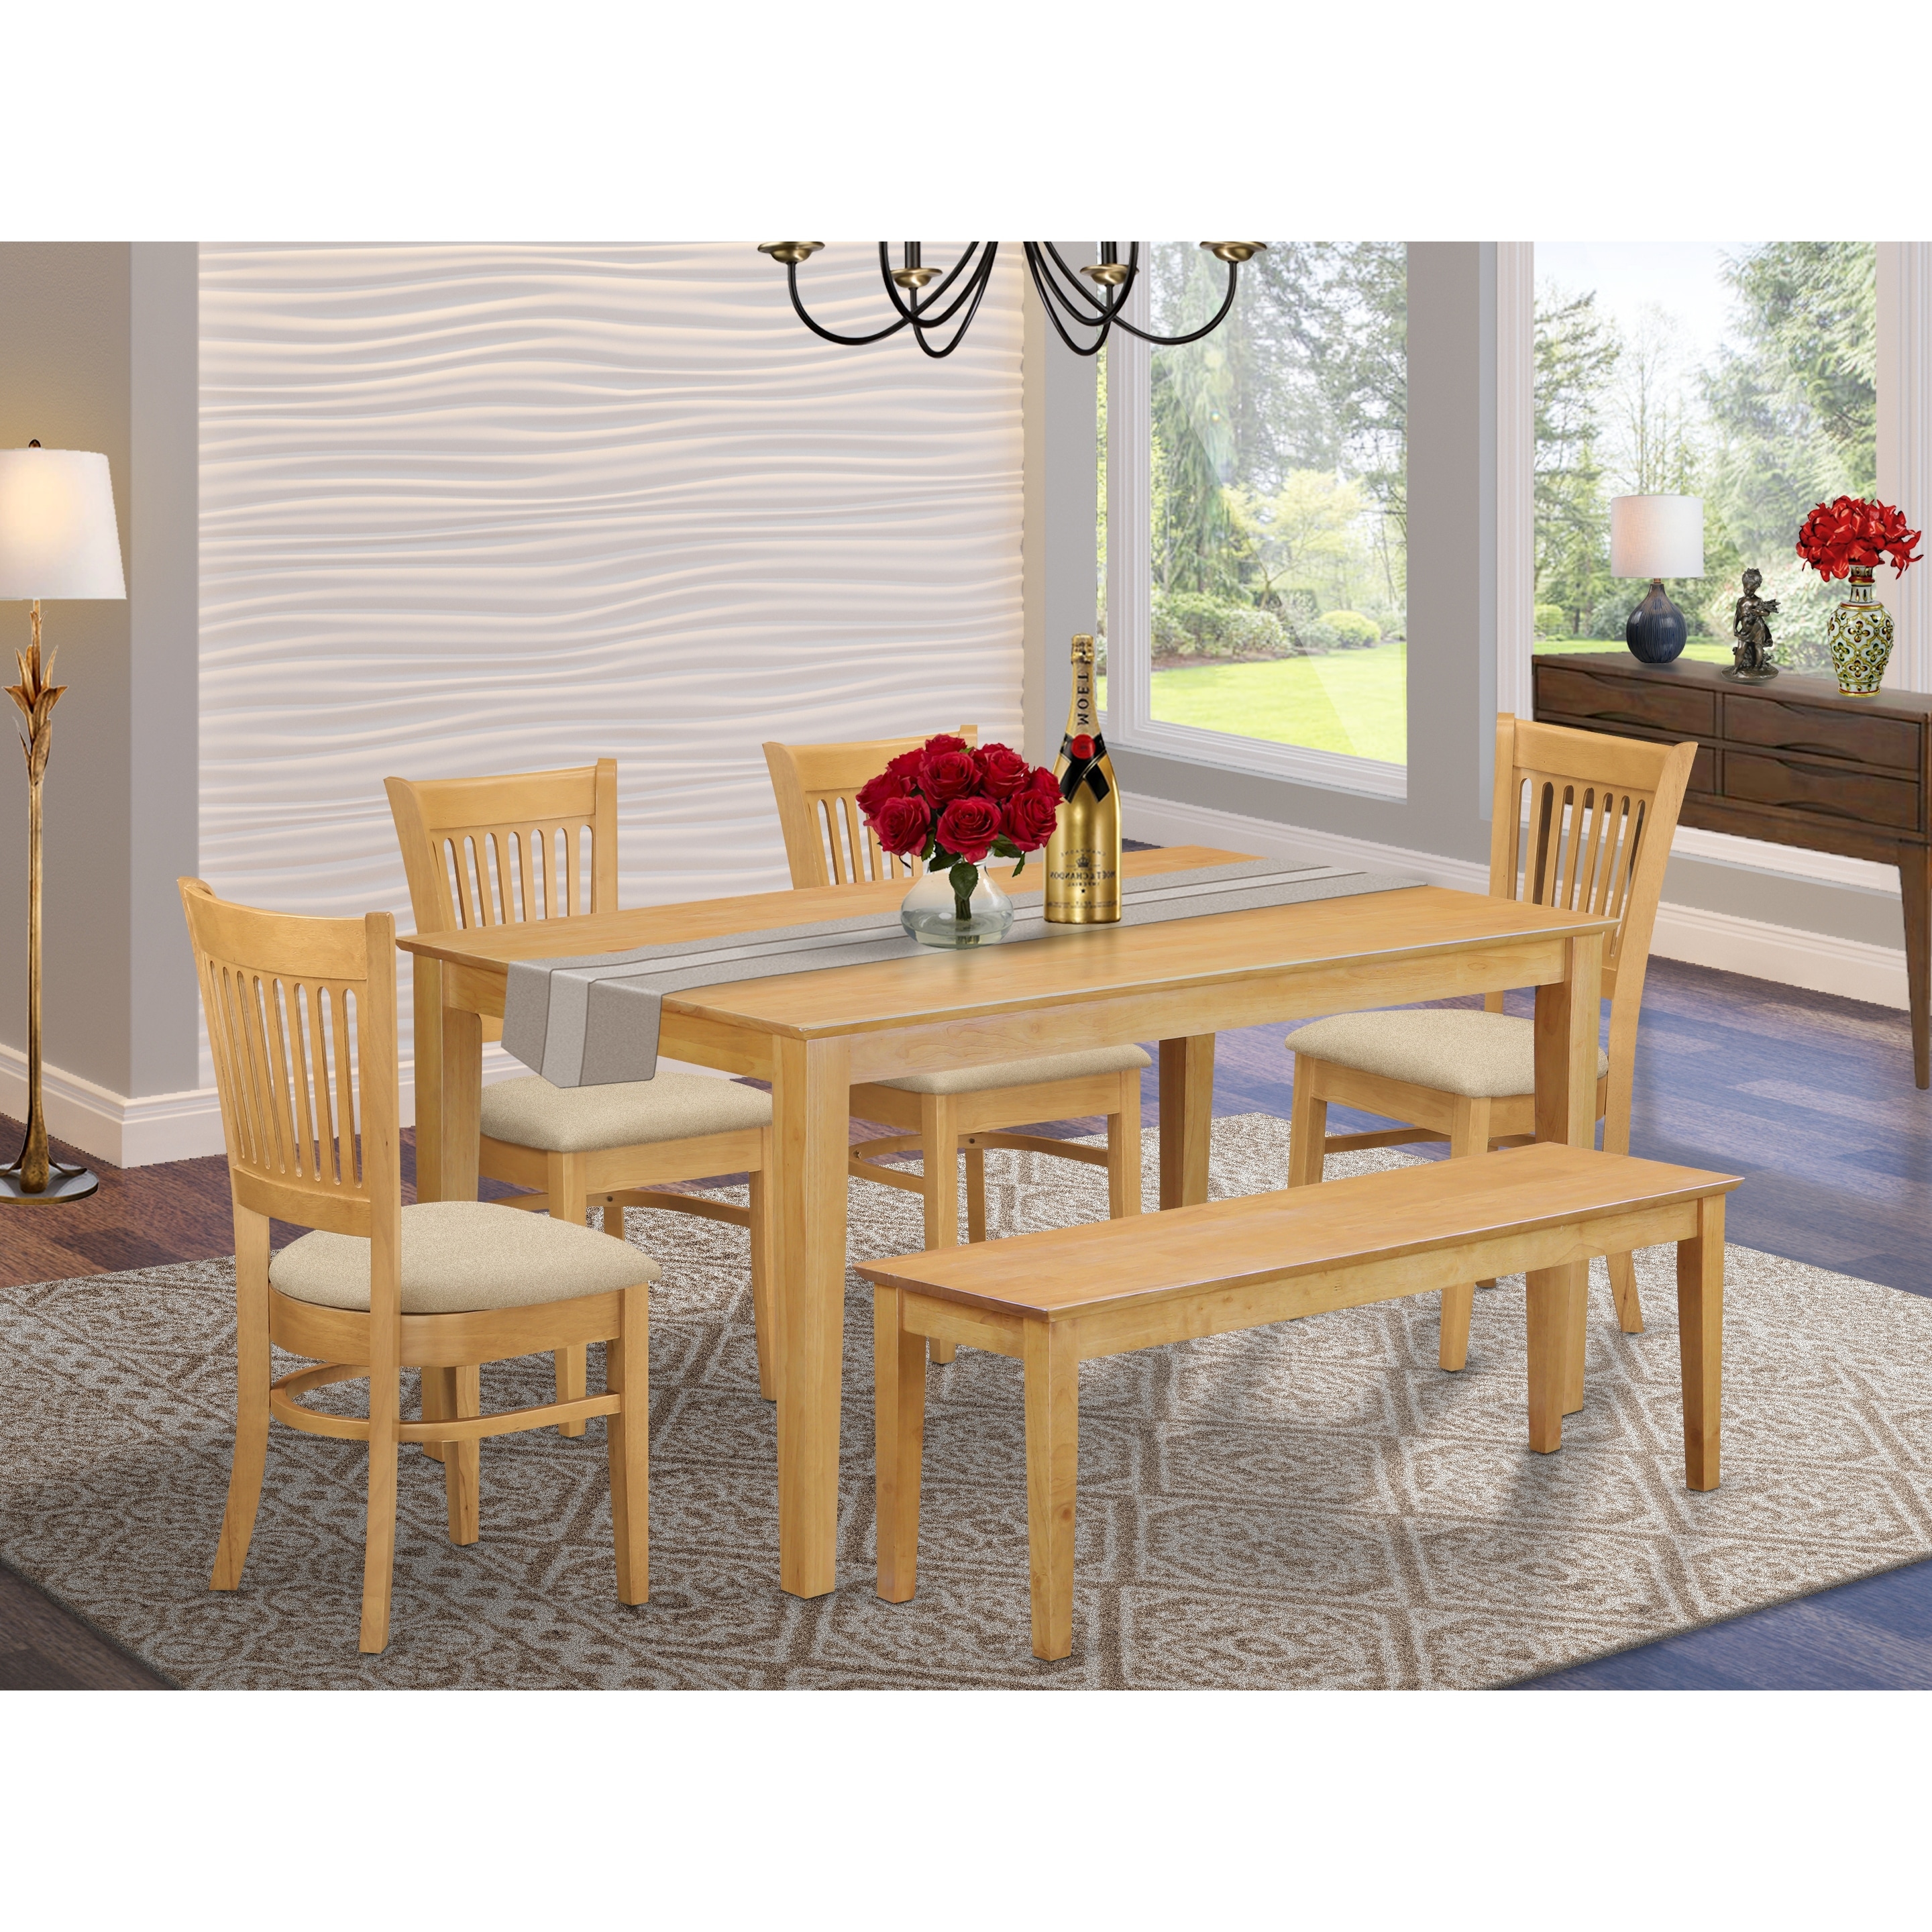 6 Piece Table Set Kitchen Table And 4 Dining Room Chairs Combined With A Wooden Dining Bench Finish Option Overstock 14366473